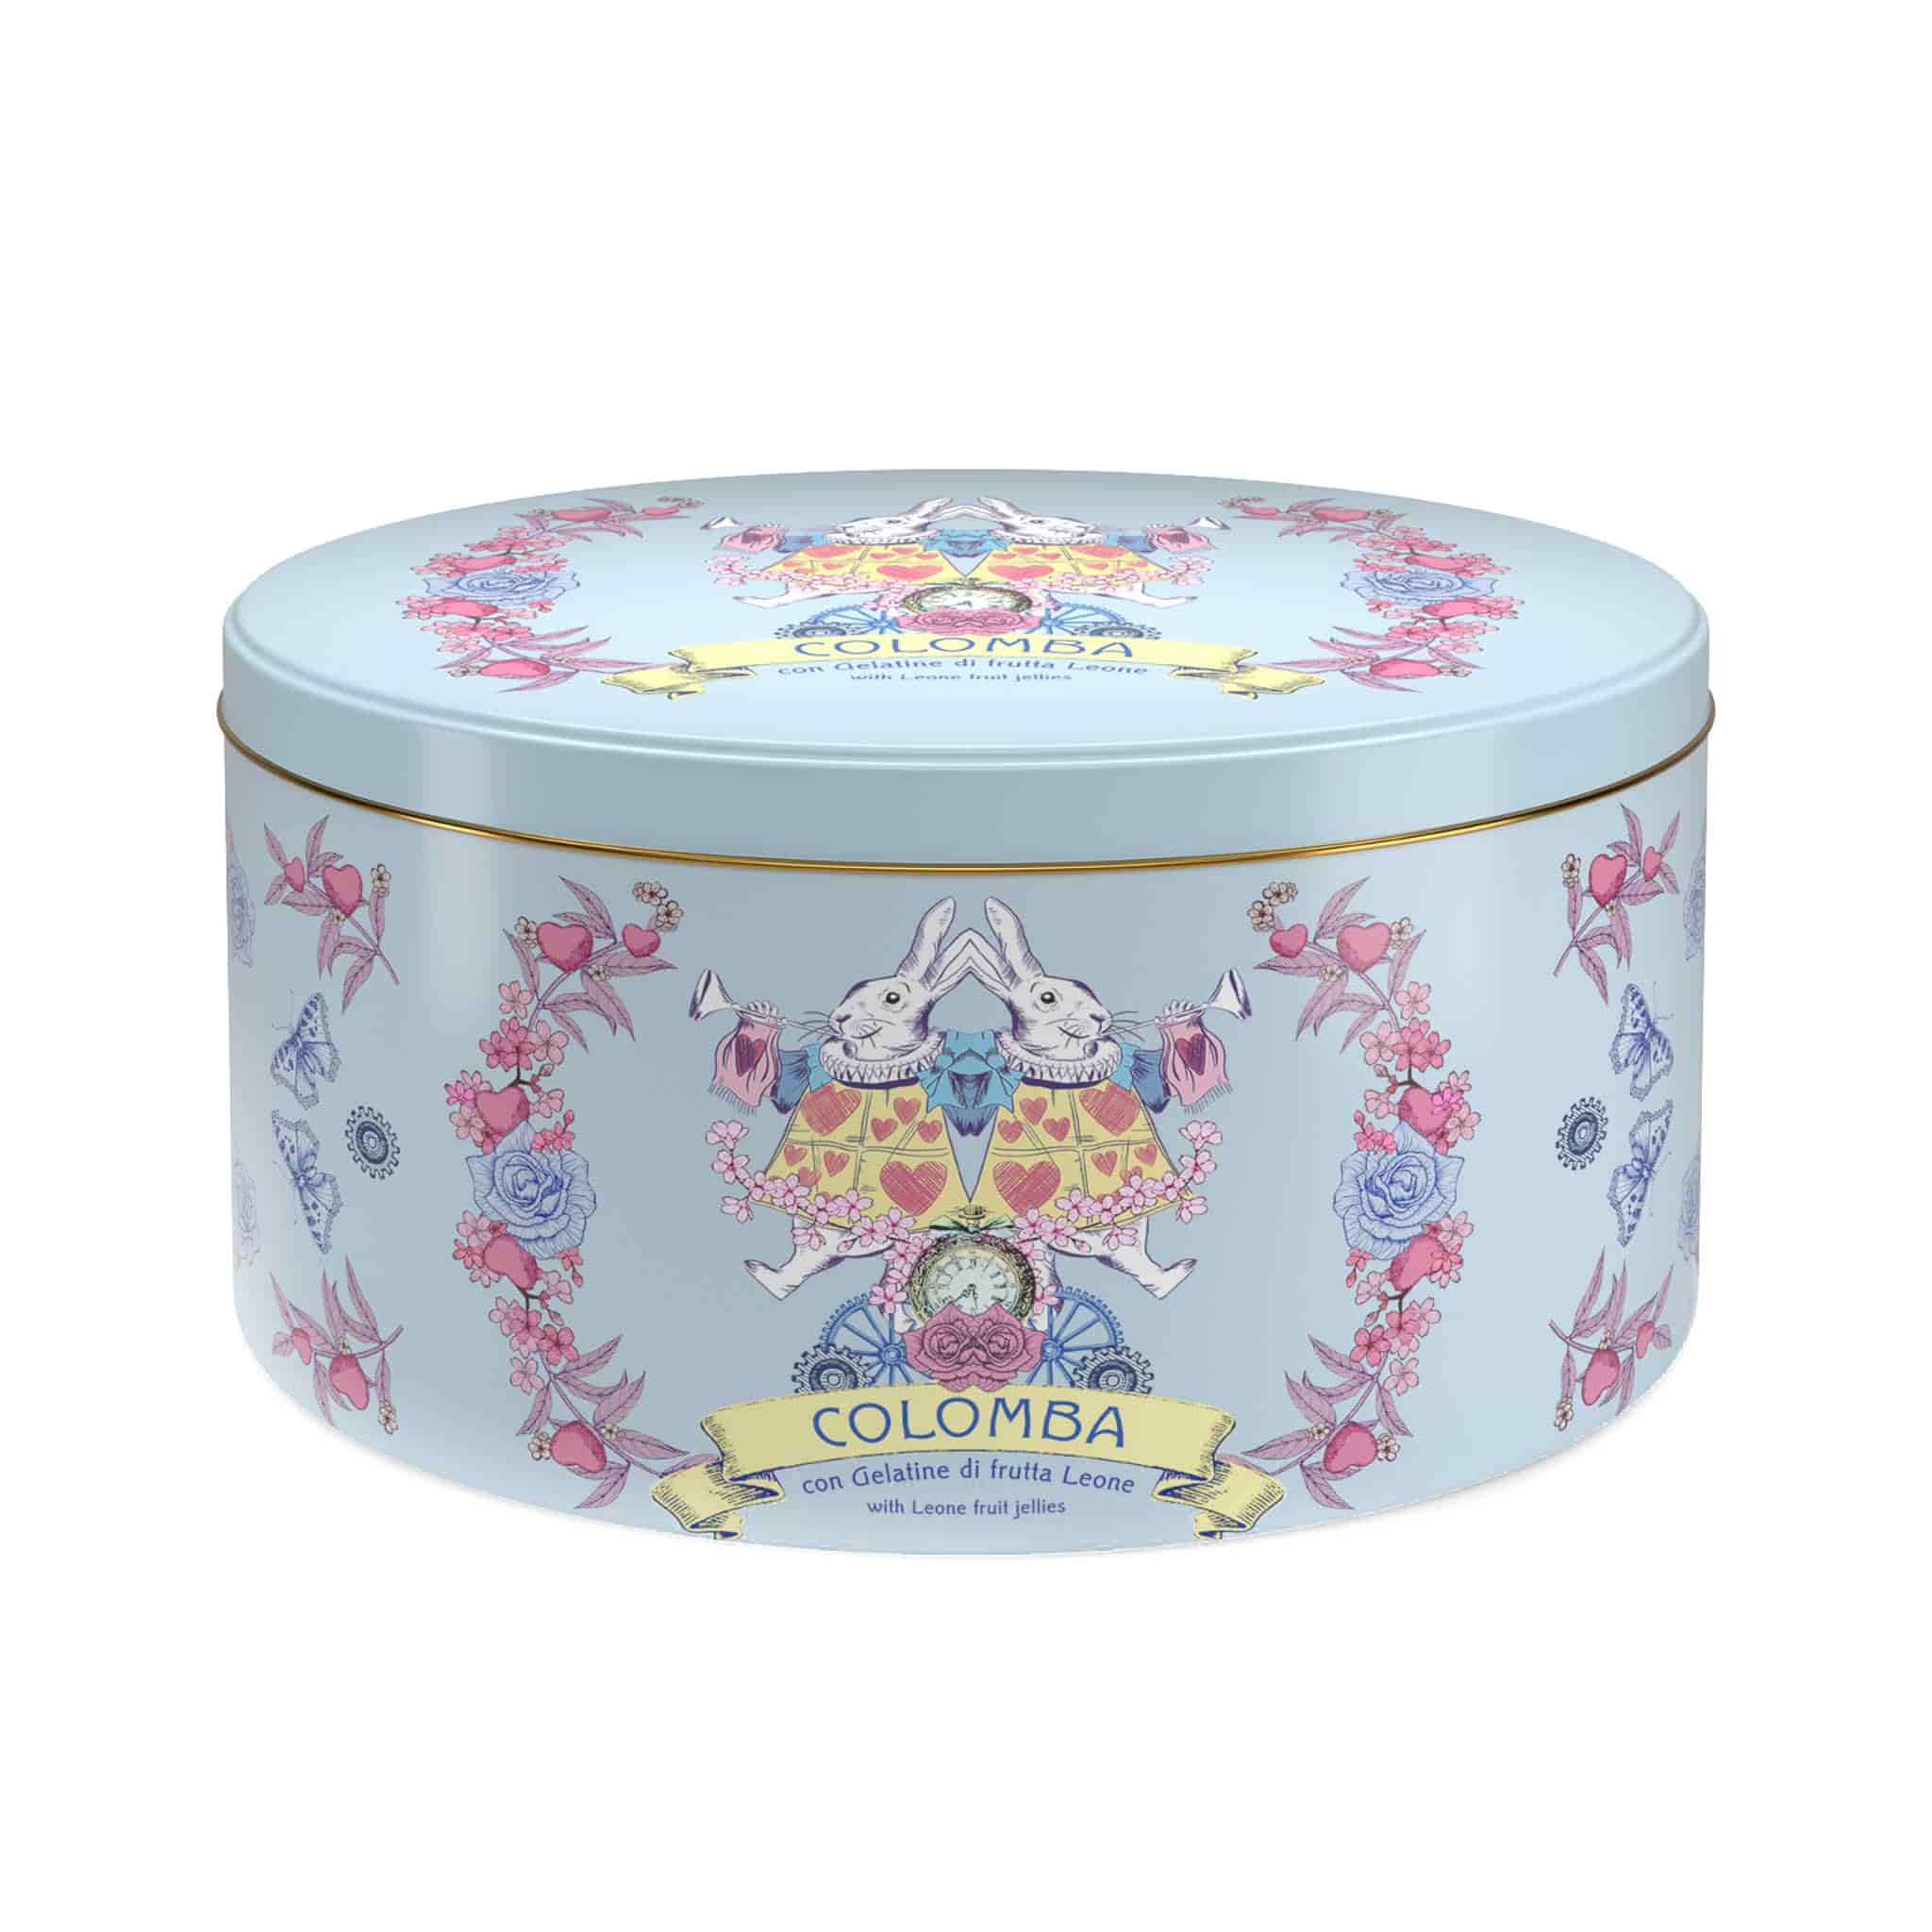 Leone Colomba With Fruit Jellies, 750g